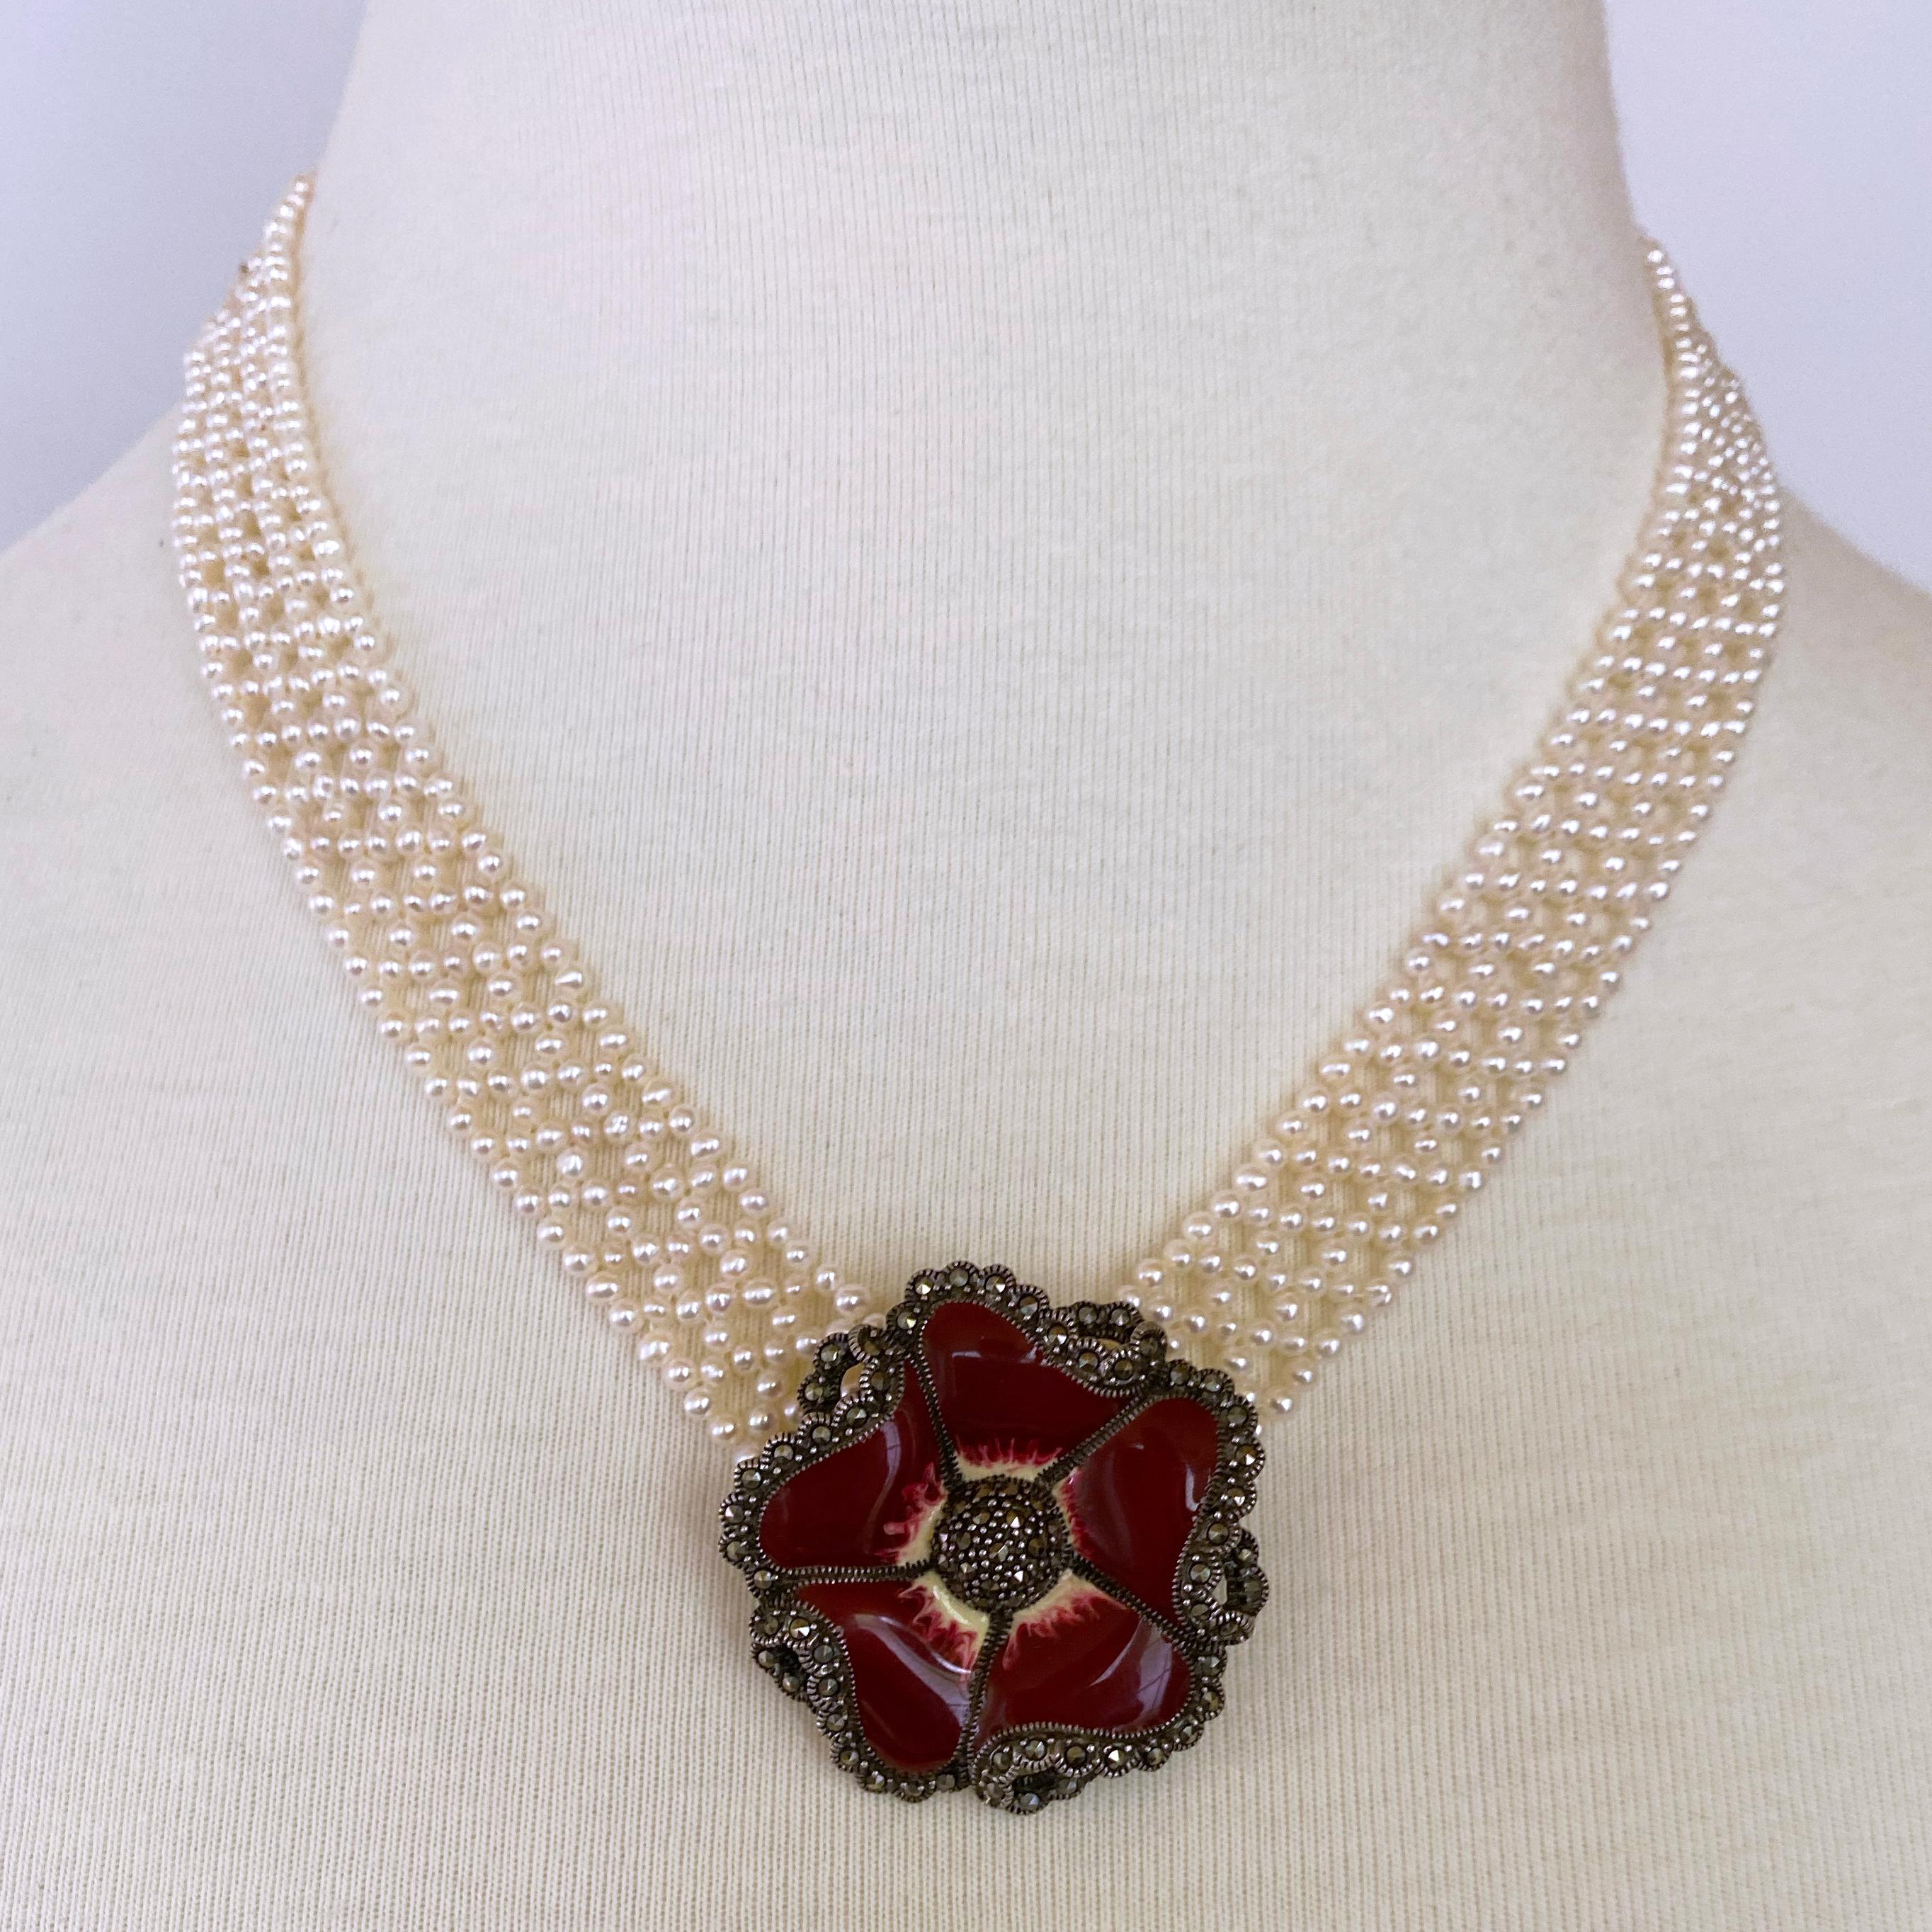 Marina J Woven 'V' Shaped Pearl Necklace with Vintage Brooch 5